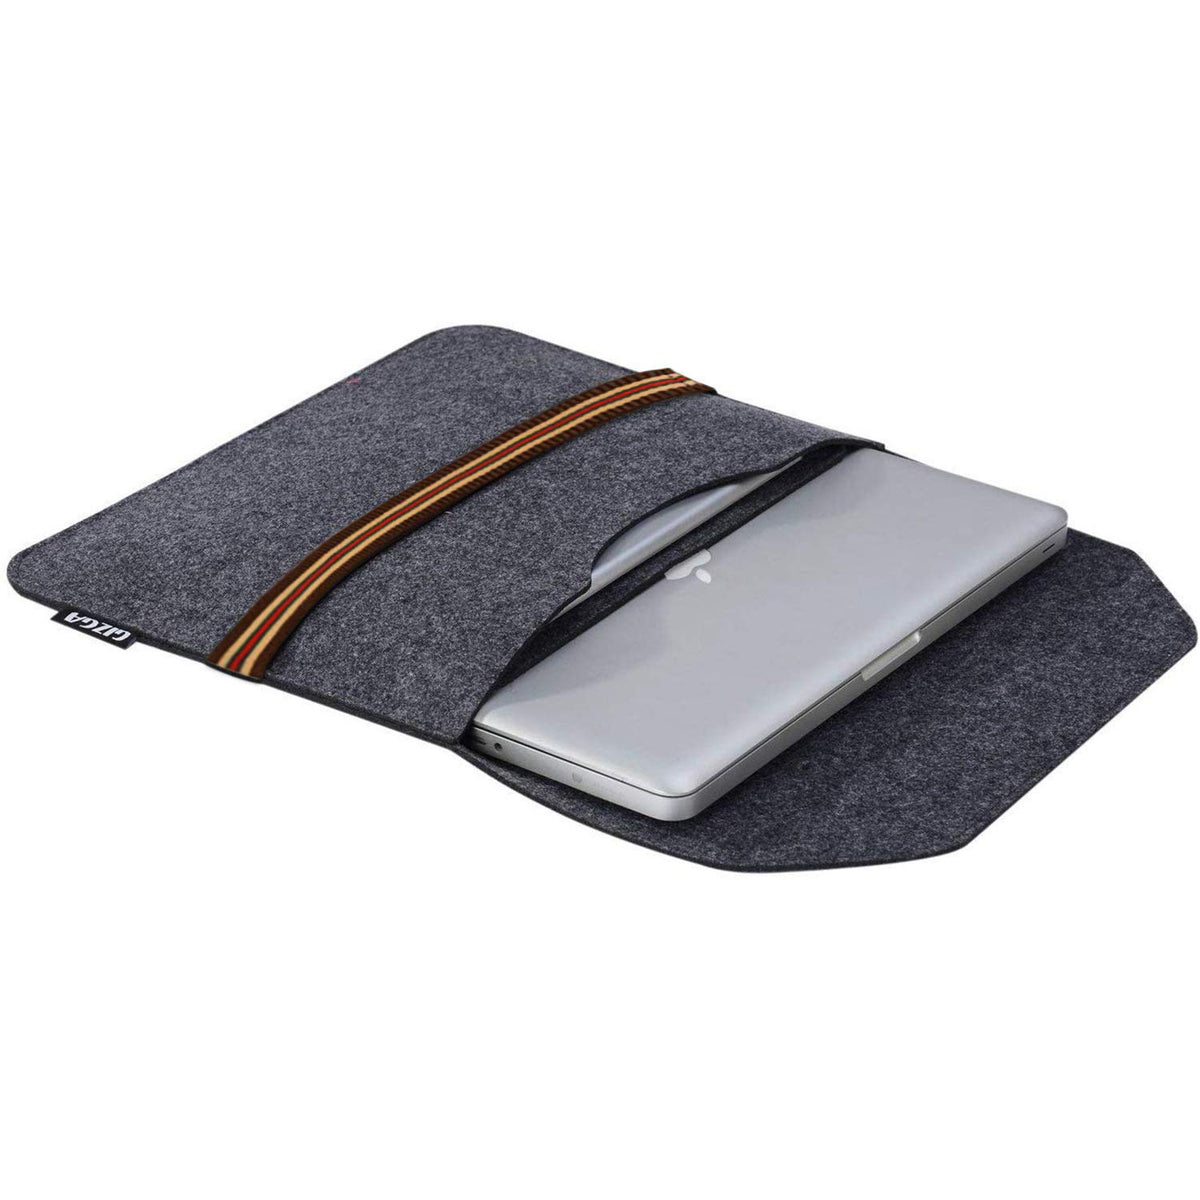 Laptop Bag Sleeve Case Cover Pouch for 15.6 Inch Laptops